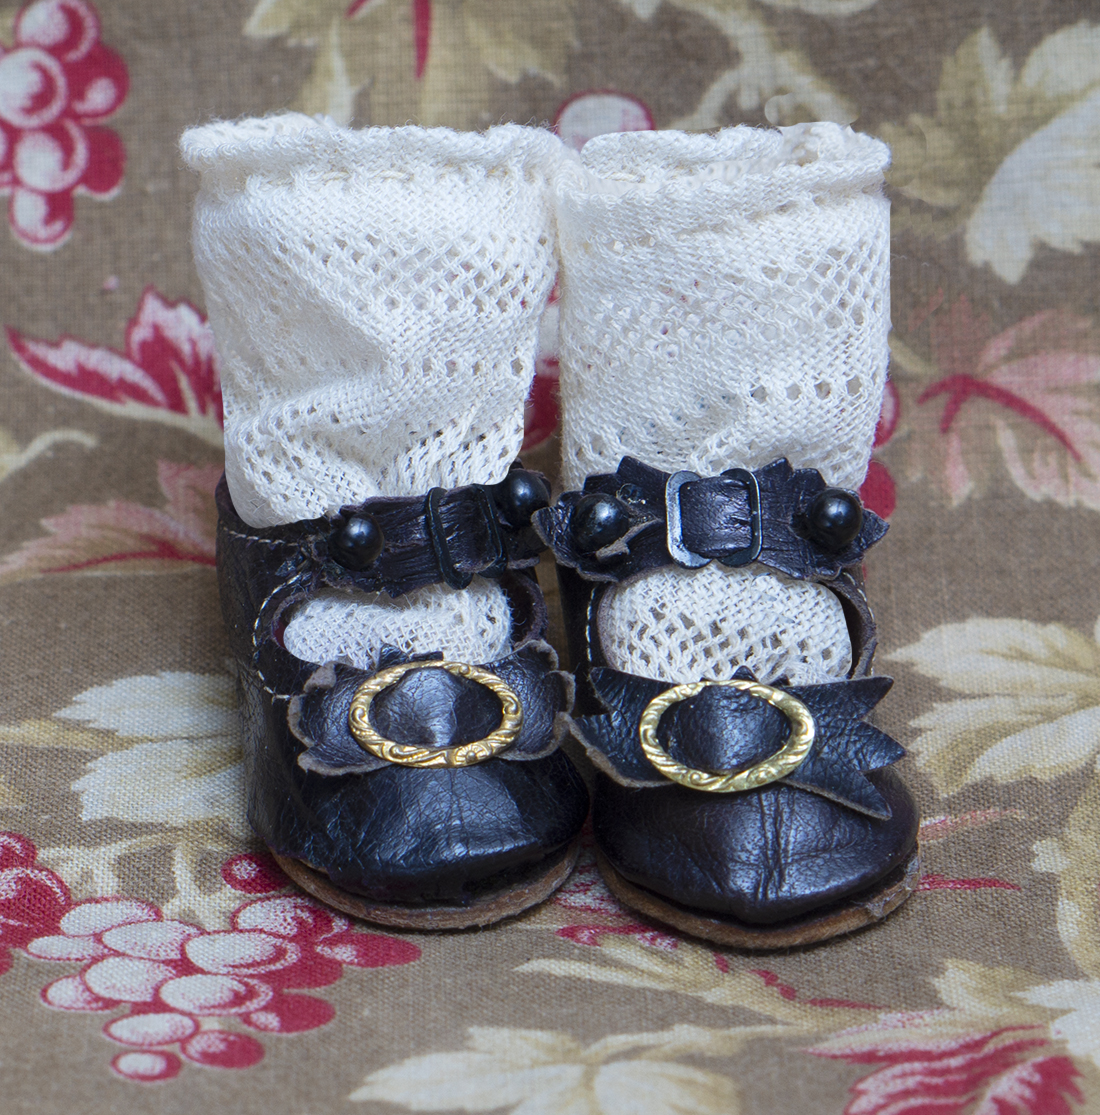 Antique doll shoes and socks